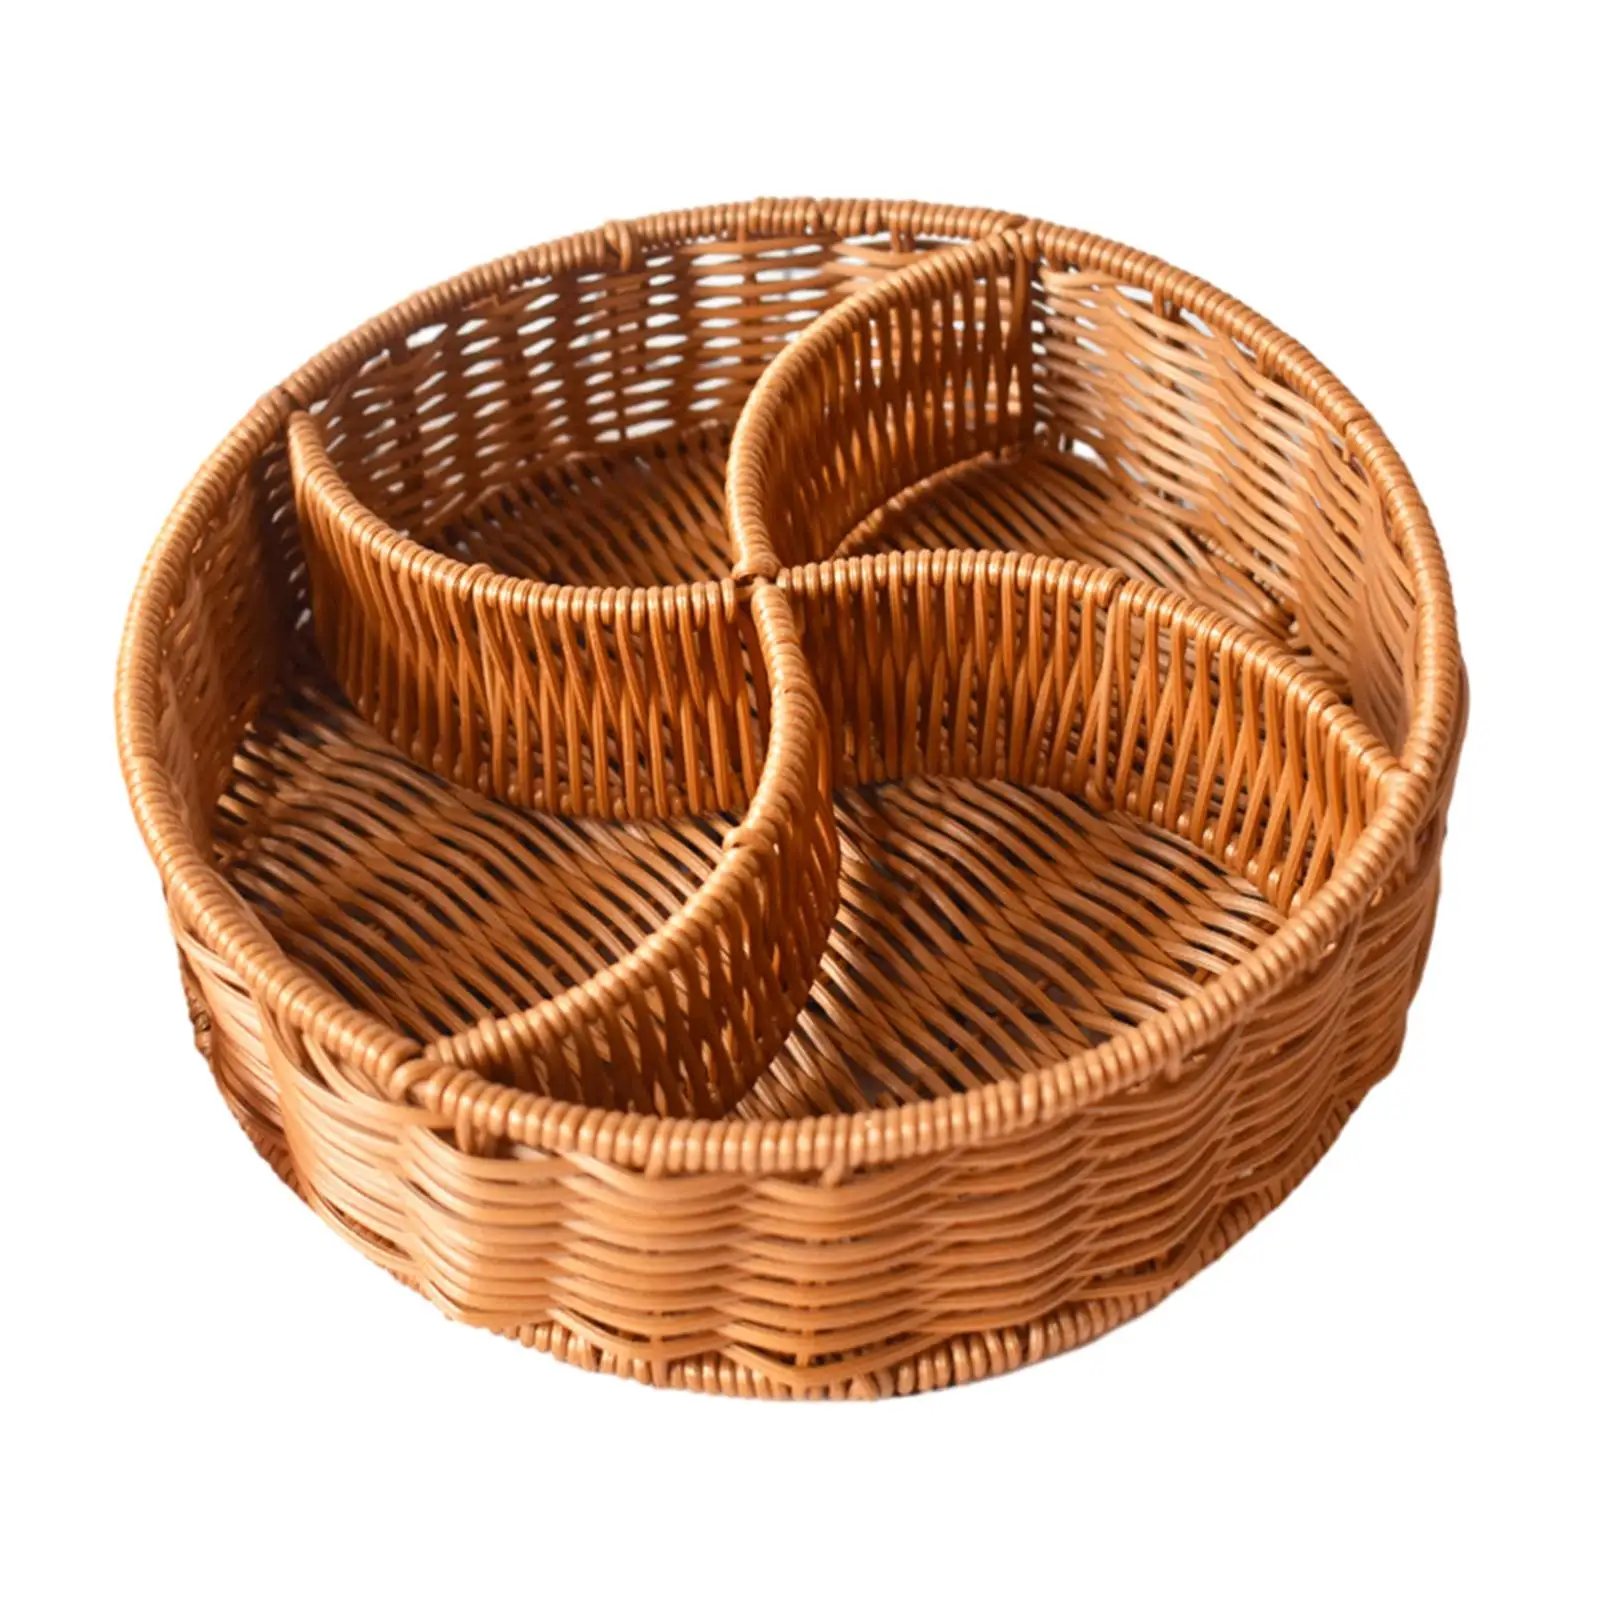 Woven Serving Basket Rustic Dividers Candy Serving Tray Home Décor Organizer Handmade for Home Dining Wedding Gift Pantry Kitchen